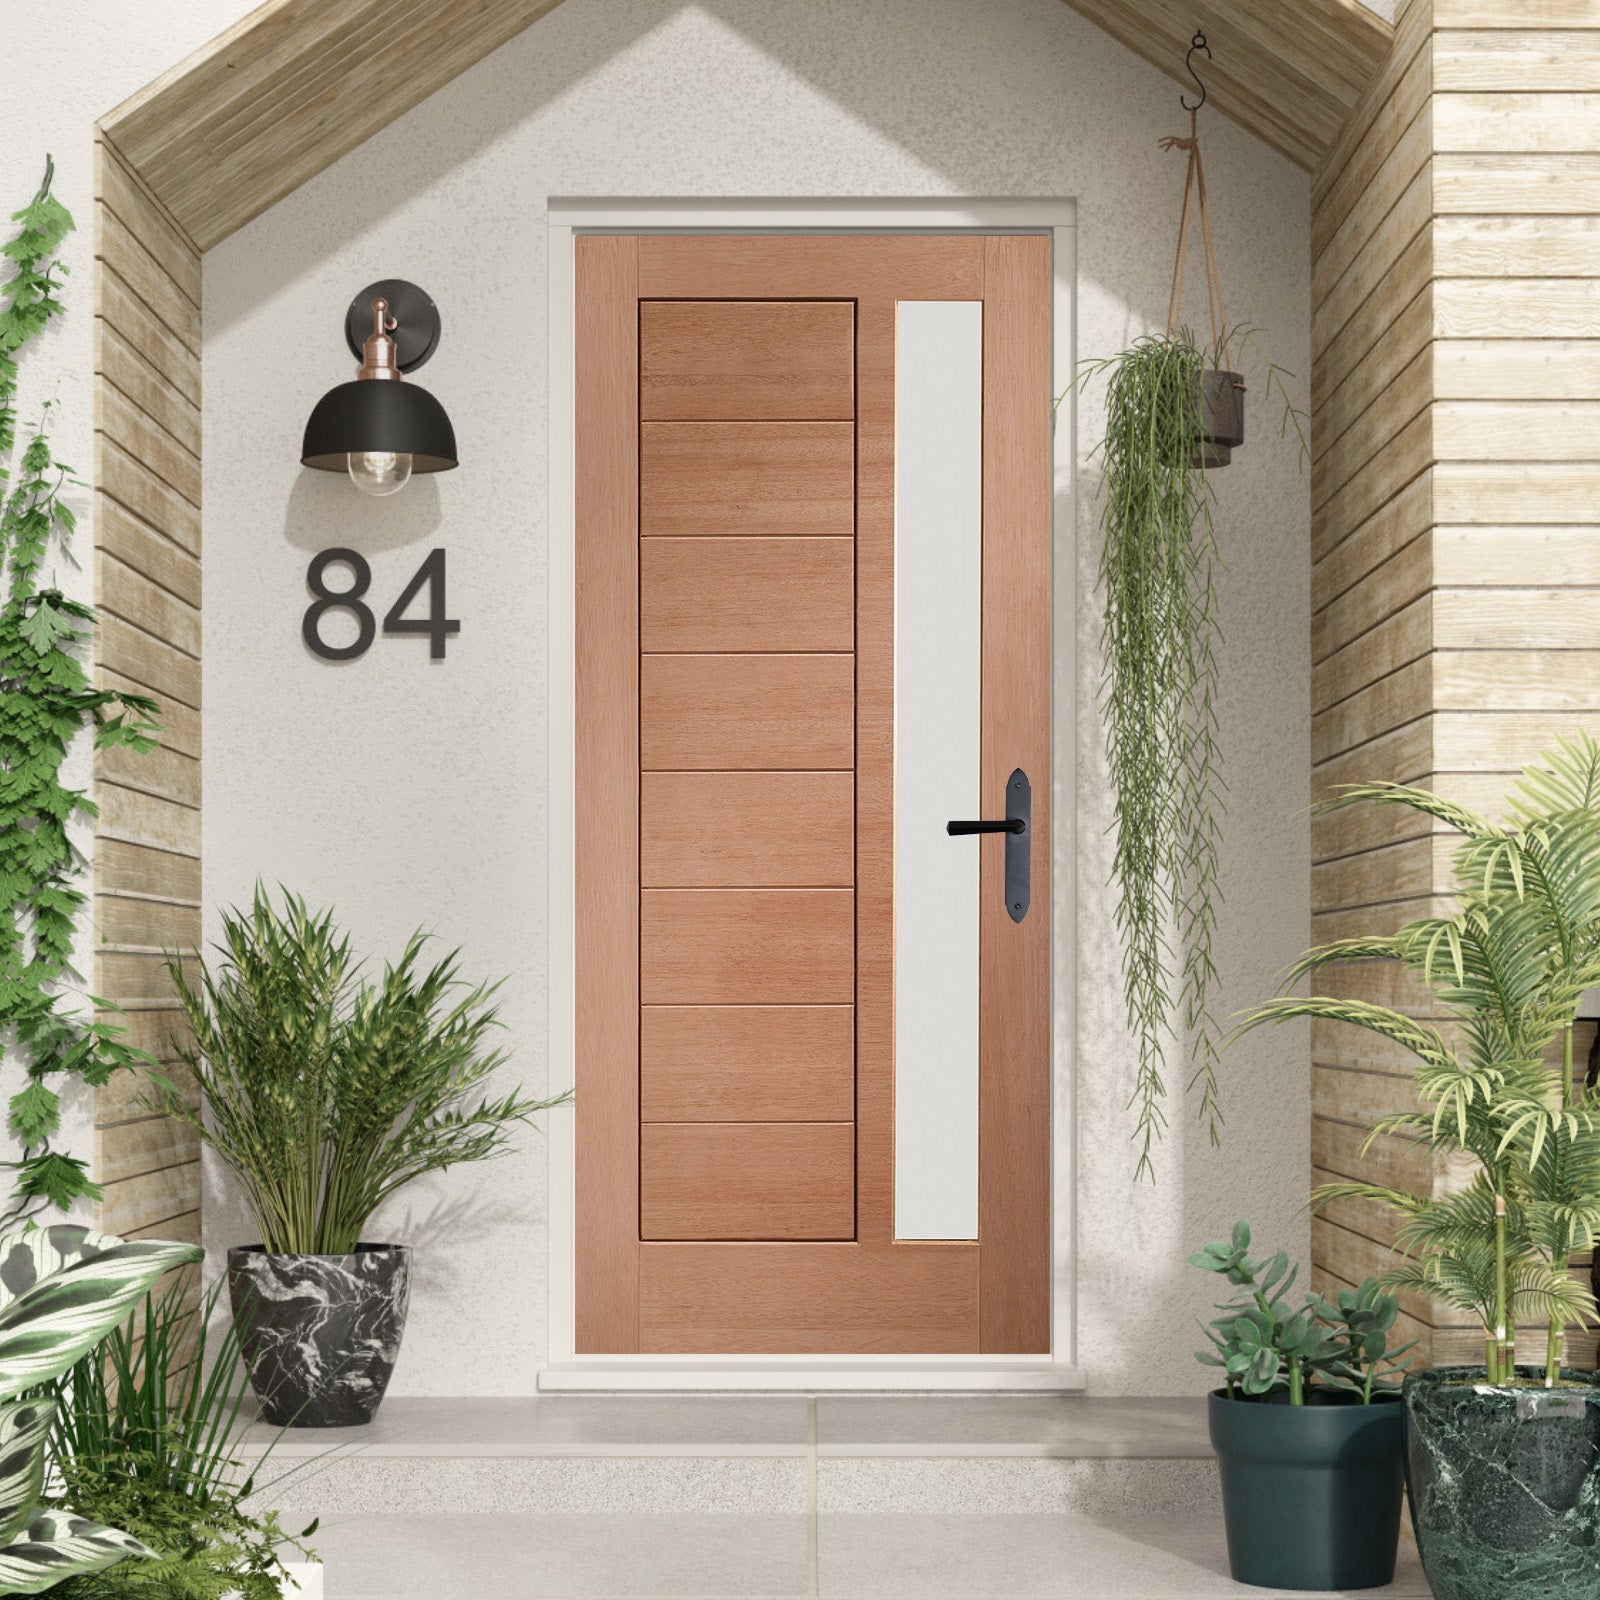 SHOW External Hardwood Modena Door with Double Glazed Obscure Glass lifestyle